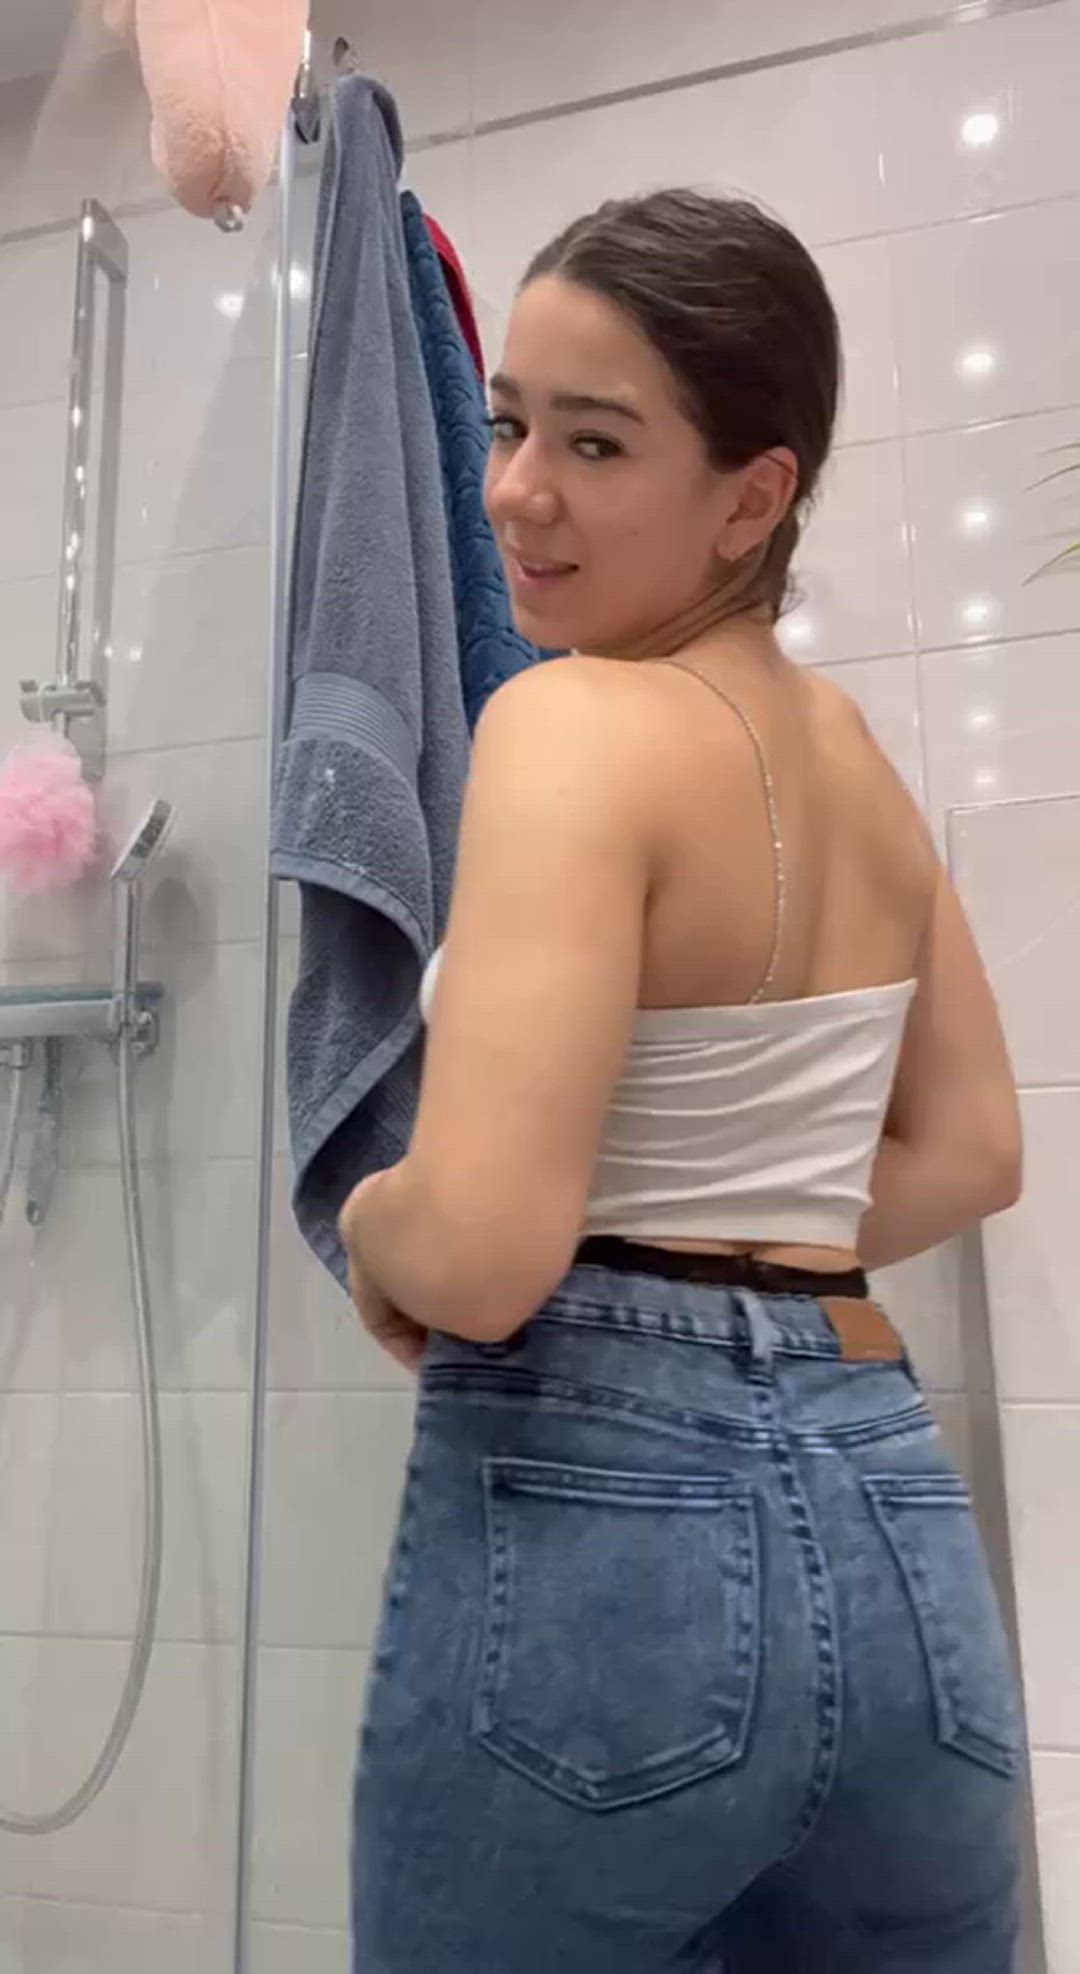 Ass porn video with onlyfans model ozanavjlcmn <strong>@iamozana</strong>